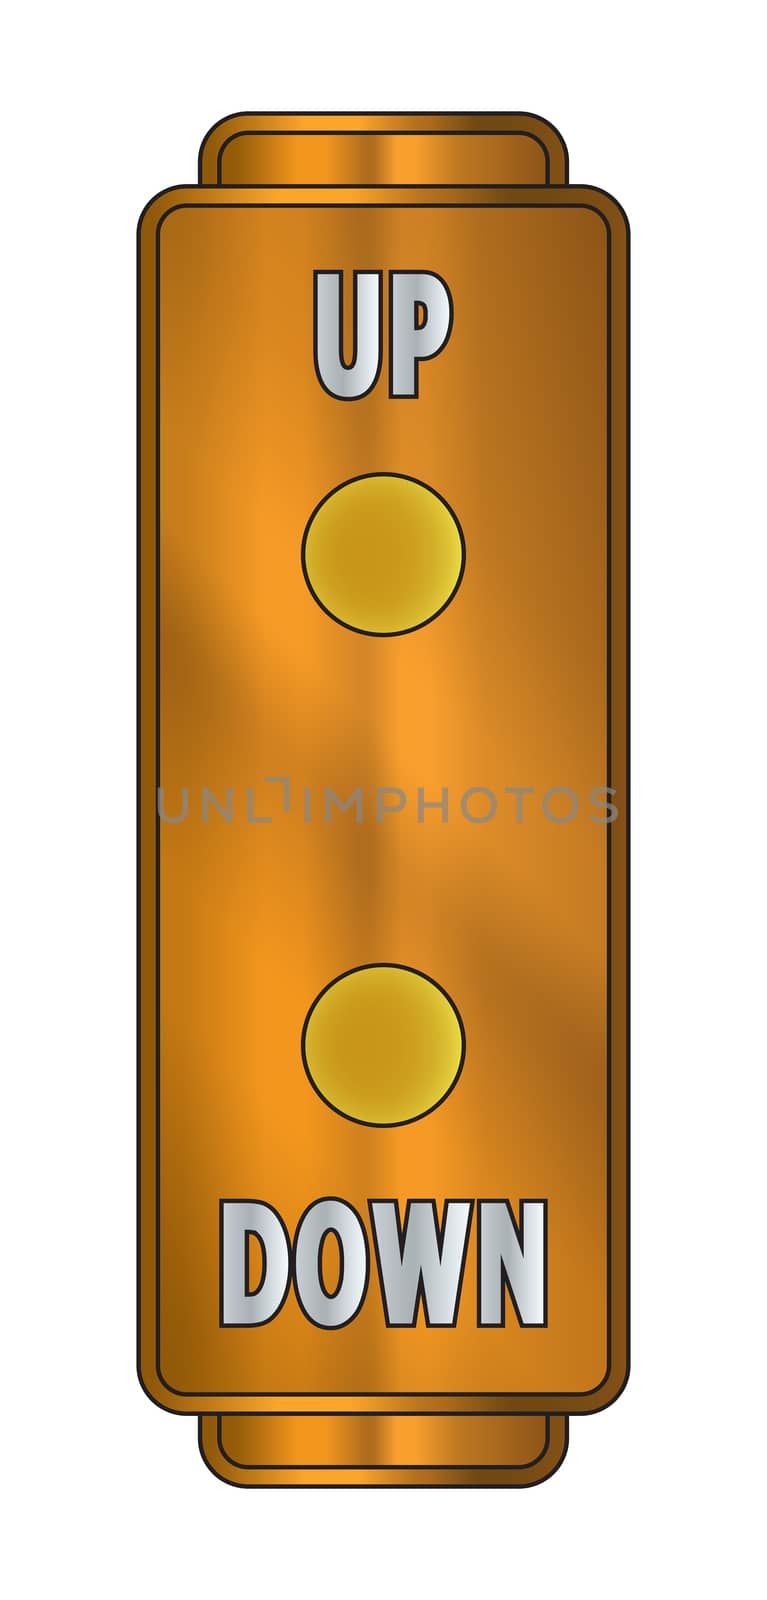 Old style elevator up and sown buttons in metal isolated on a white background